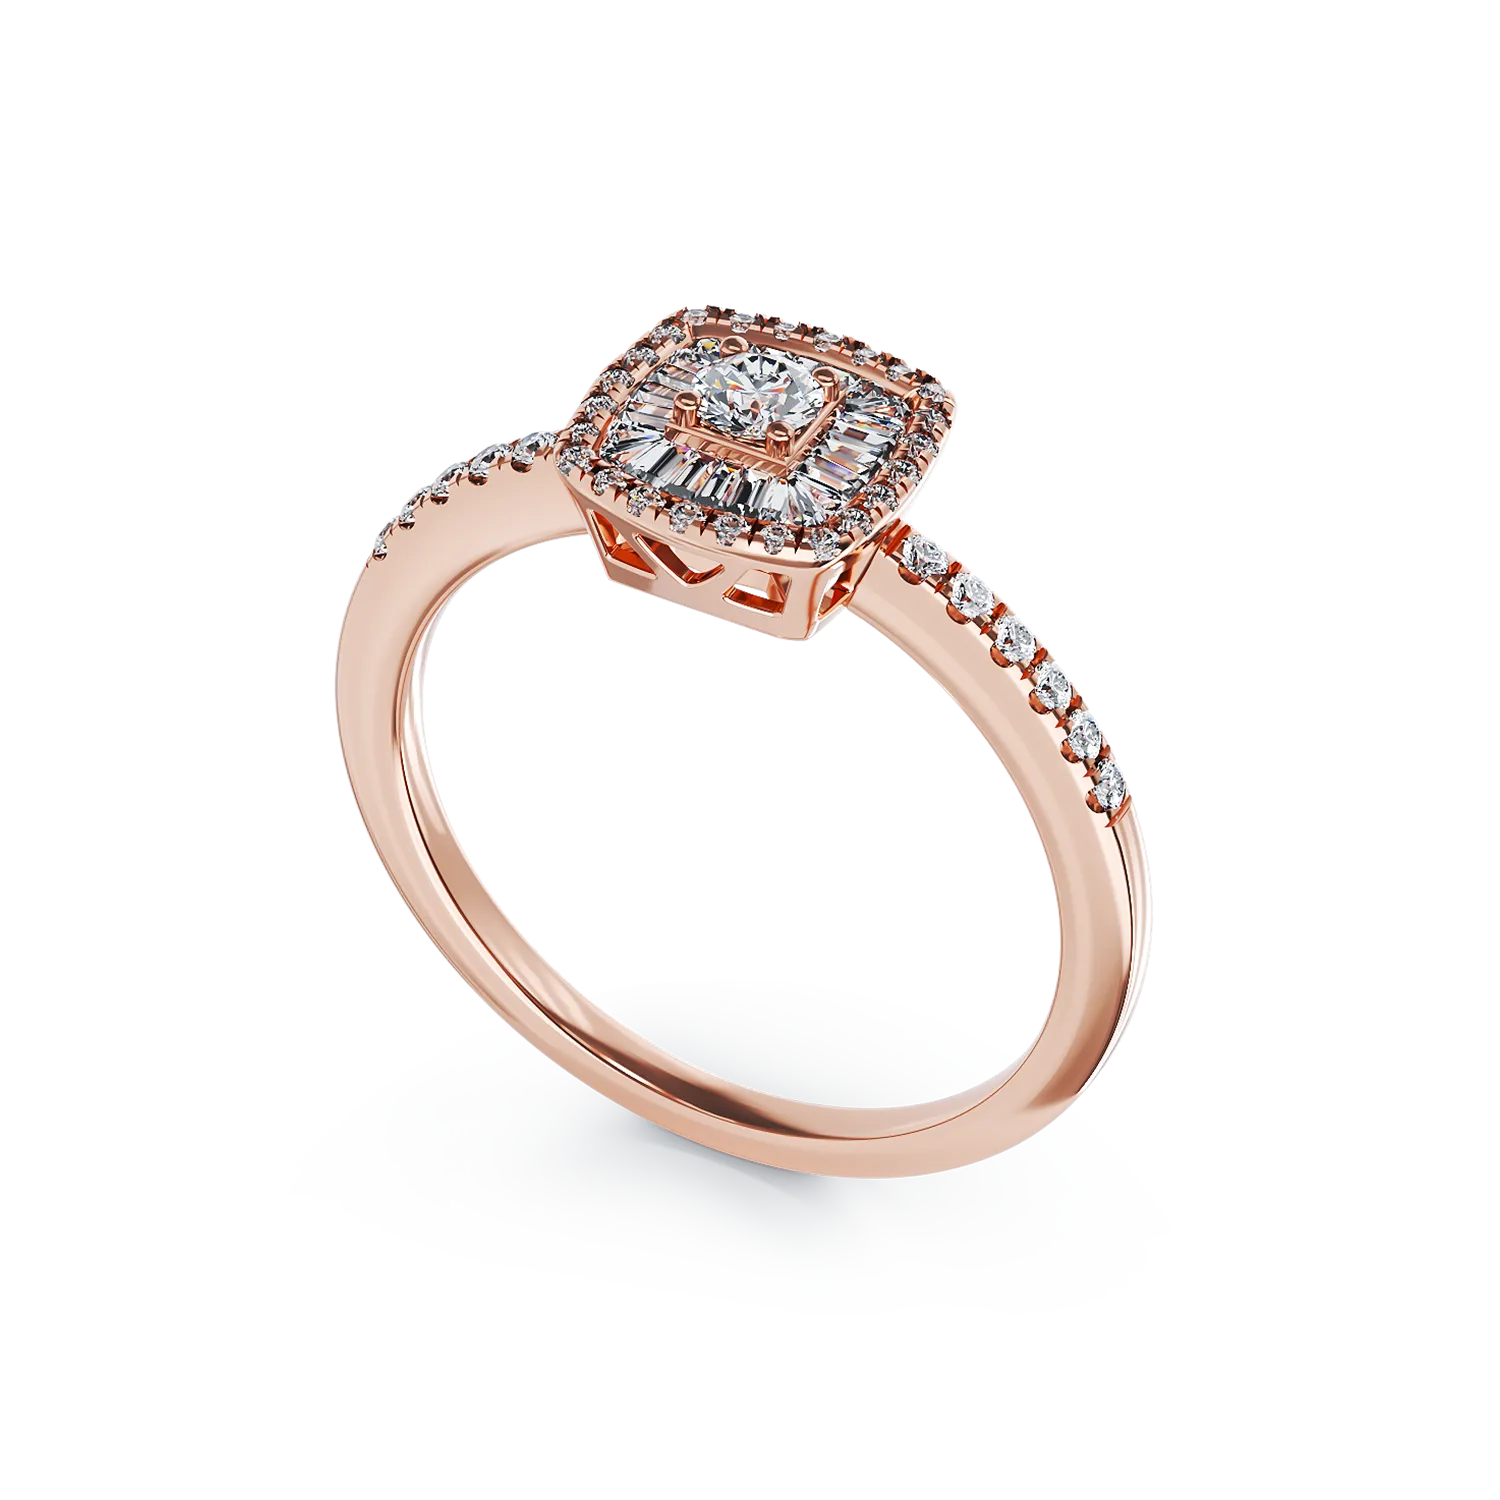 18K rose gold engagement ring with 0.36ct diamonds